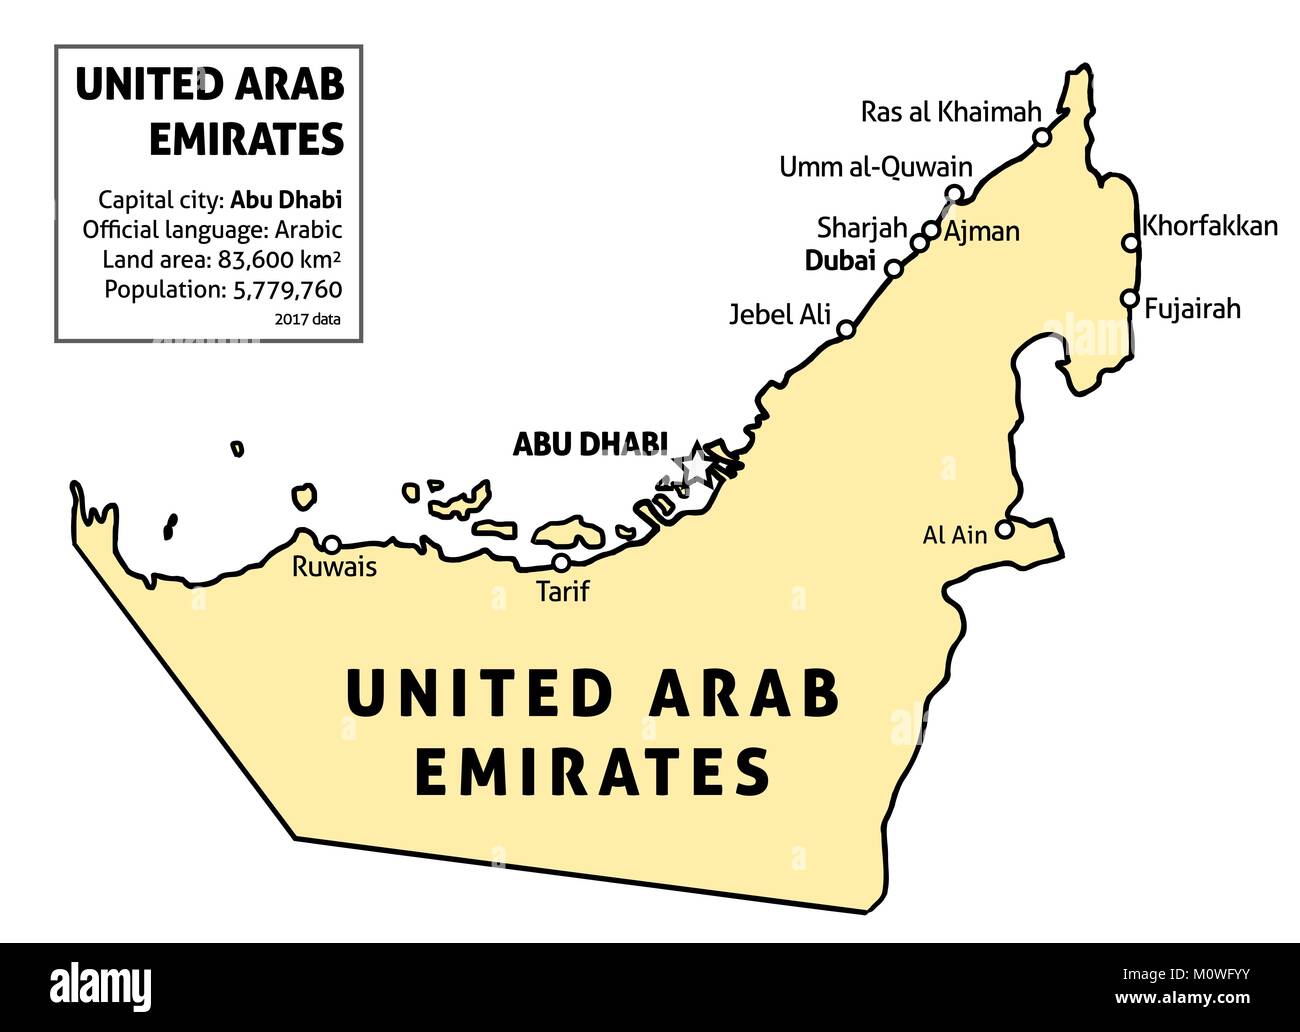 United Arab Emirates (UAE) map. Outline vector country map with main cities and data table. Stock Vector